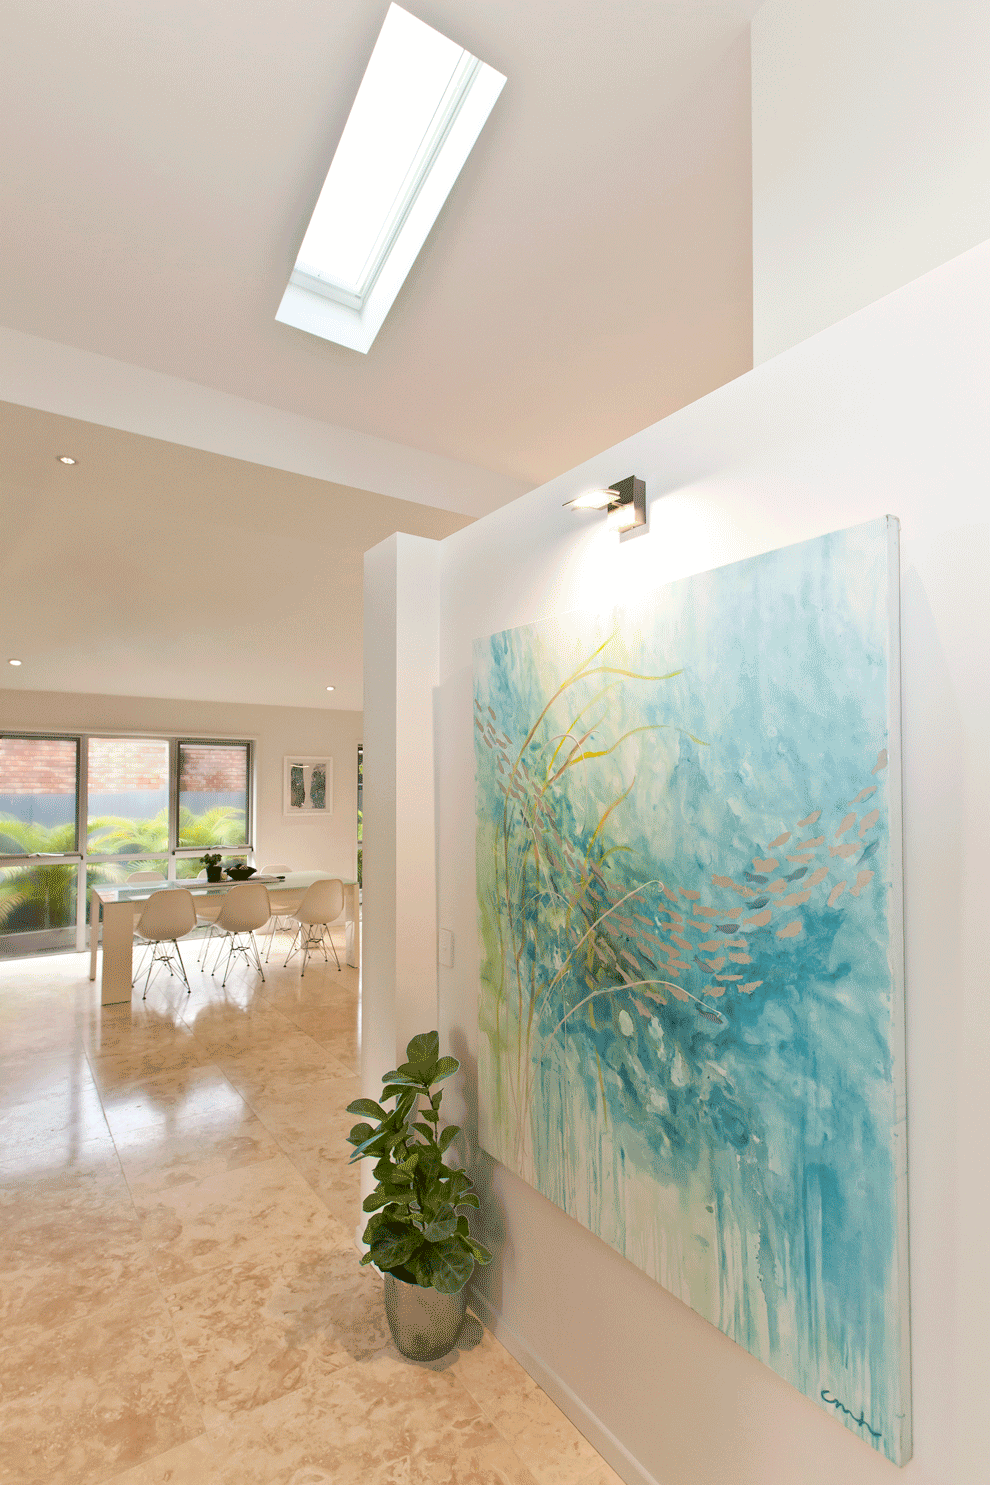 A modern interior showcasing a large canvas painting on a wall, suffolk coast views, light aquamarine and green textiles, and travertine tiled floor.